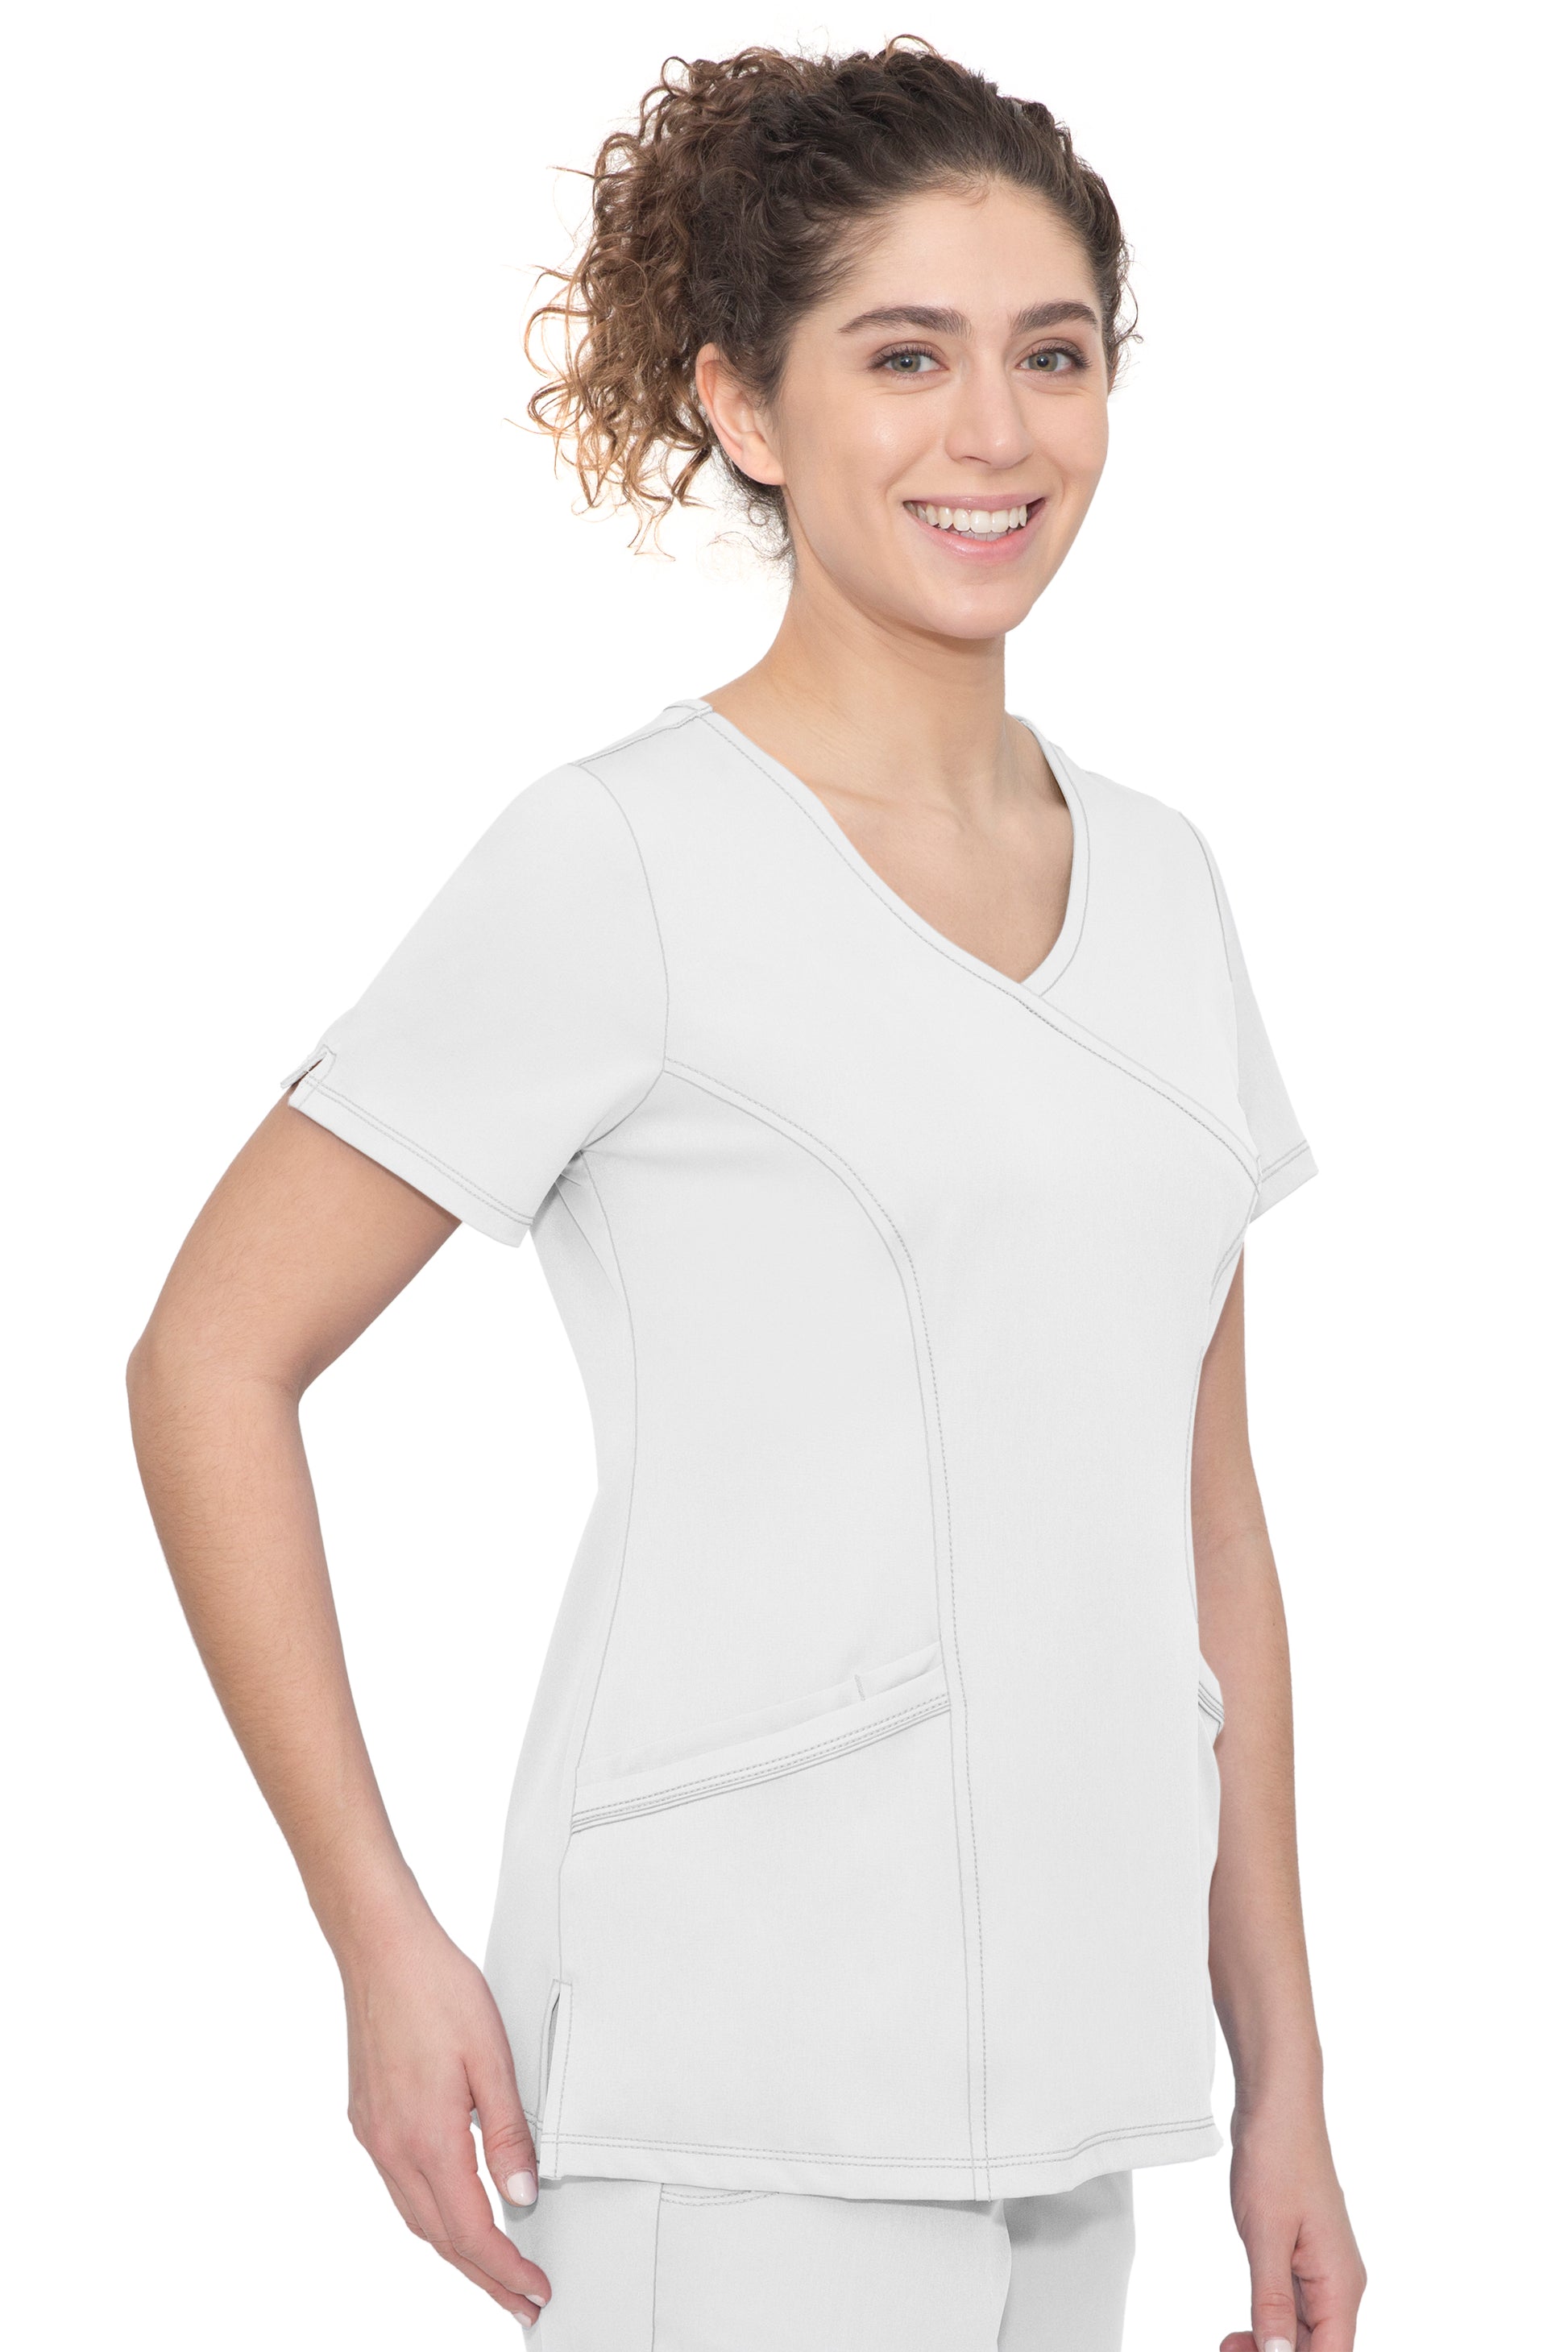 Healing Hands HH Works 2525 Madison Women's Top White